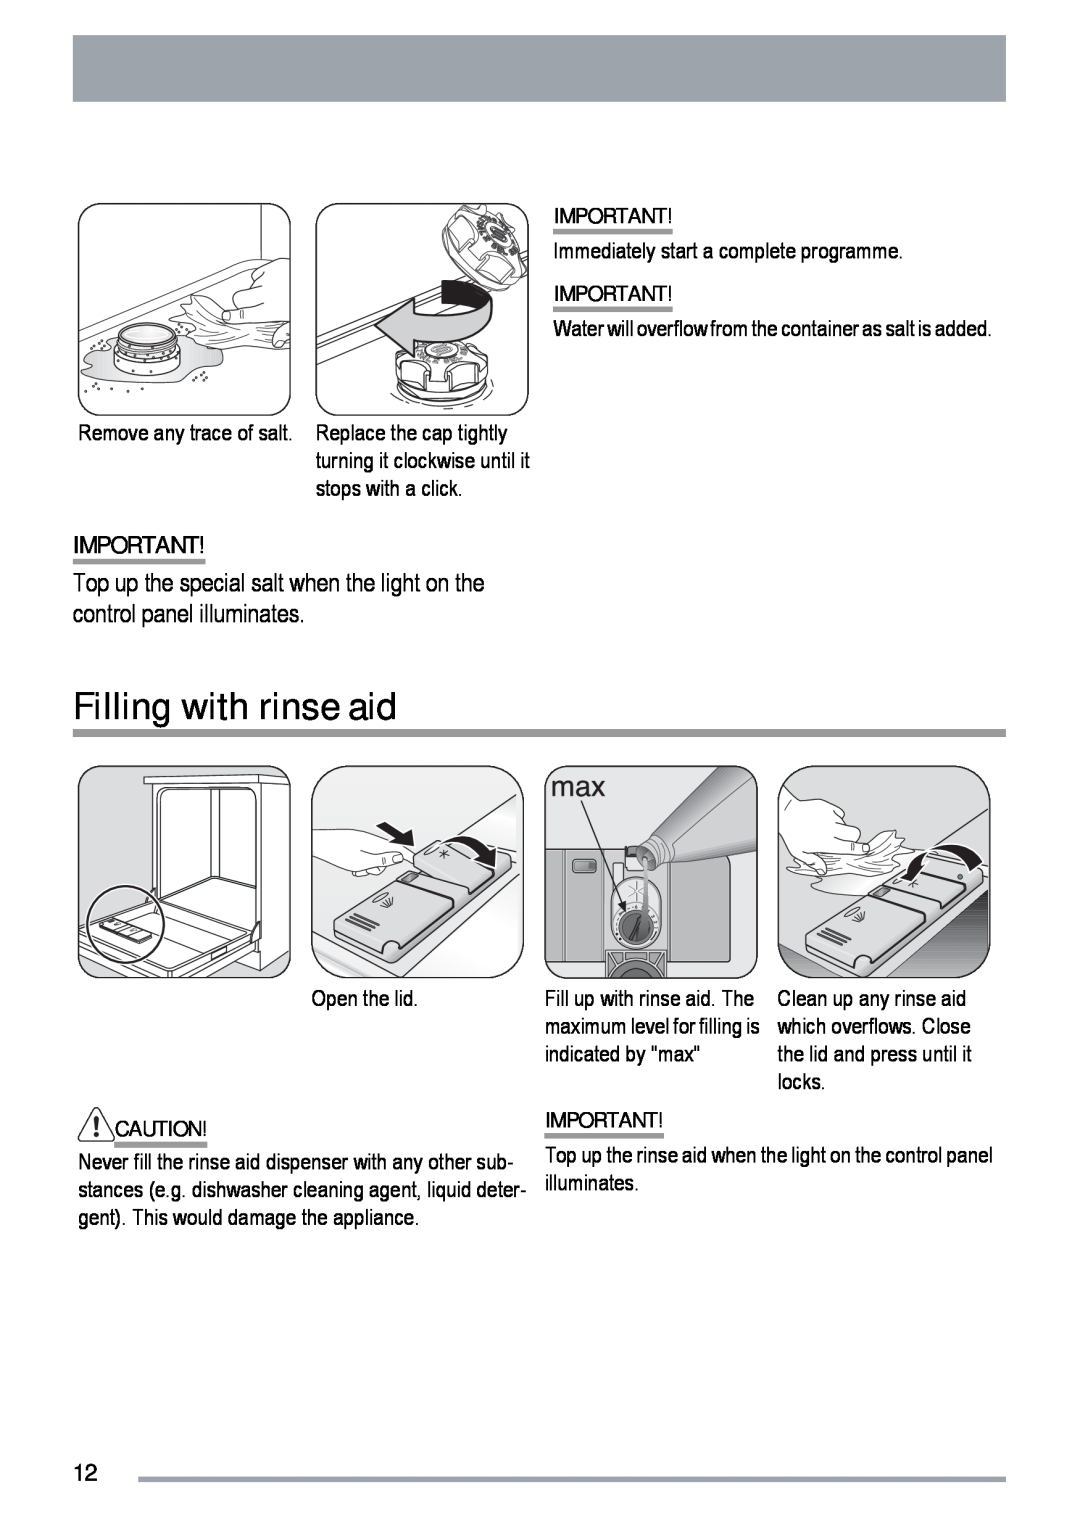 Zanussi ZDF 312 user manual Filling with rinse aid, Immediately start a complete programme, Open the lid 